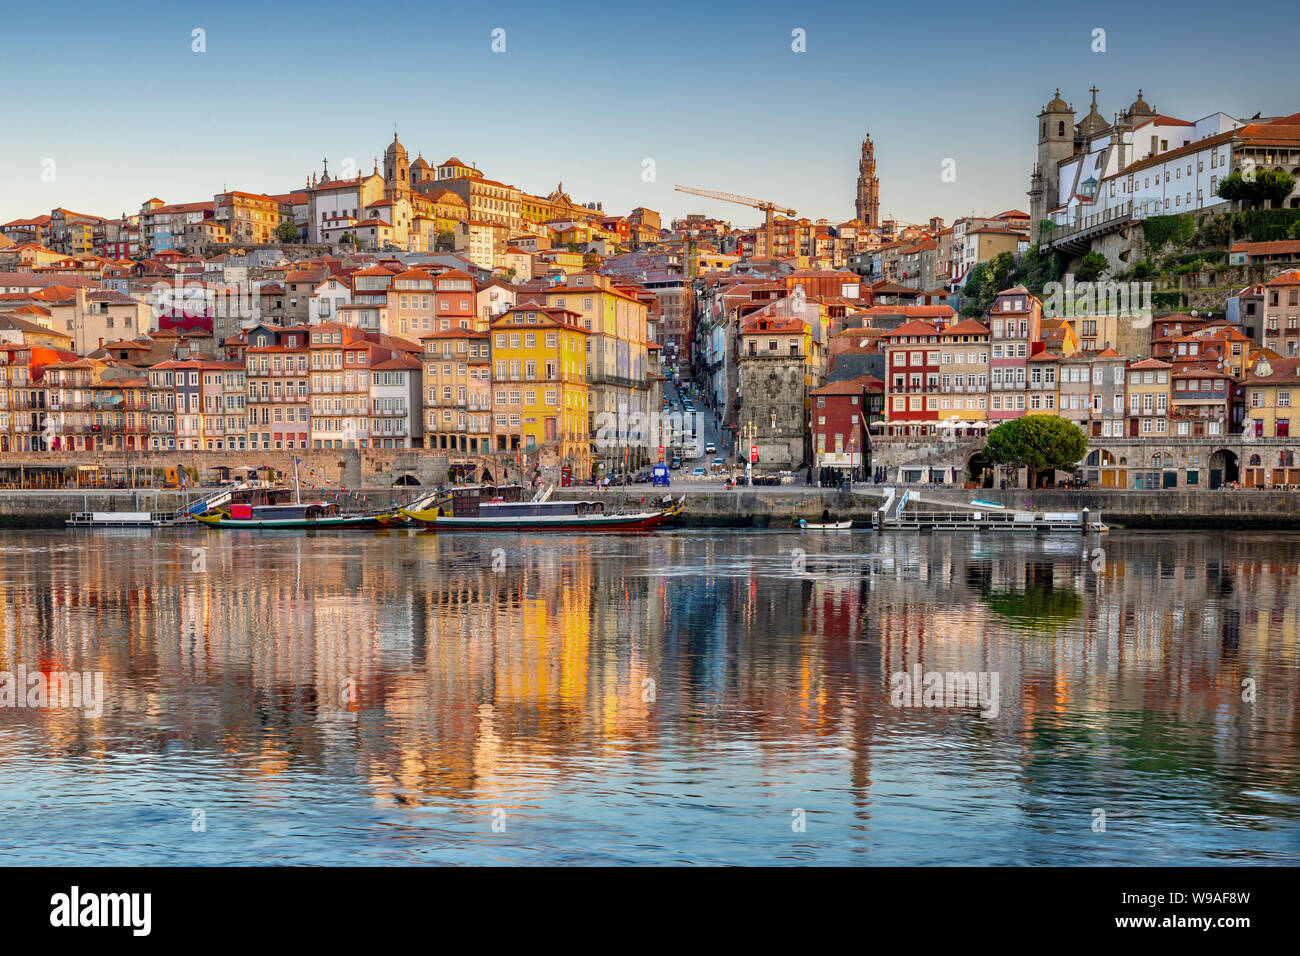 Porto, Portugal old town skyline from across the Douro River. Stock Photo